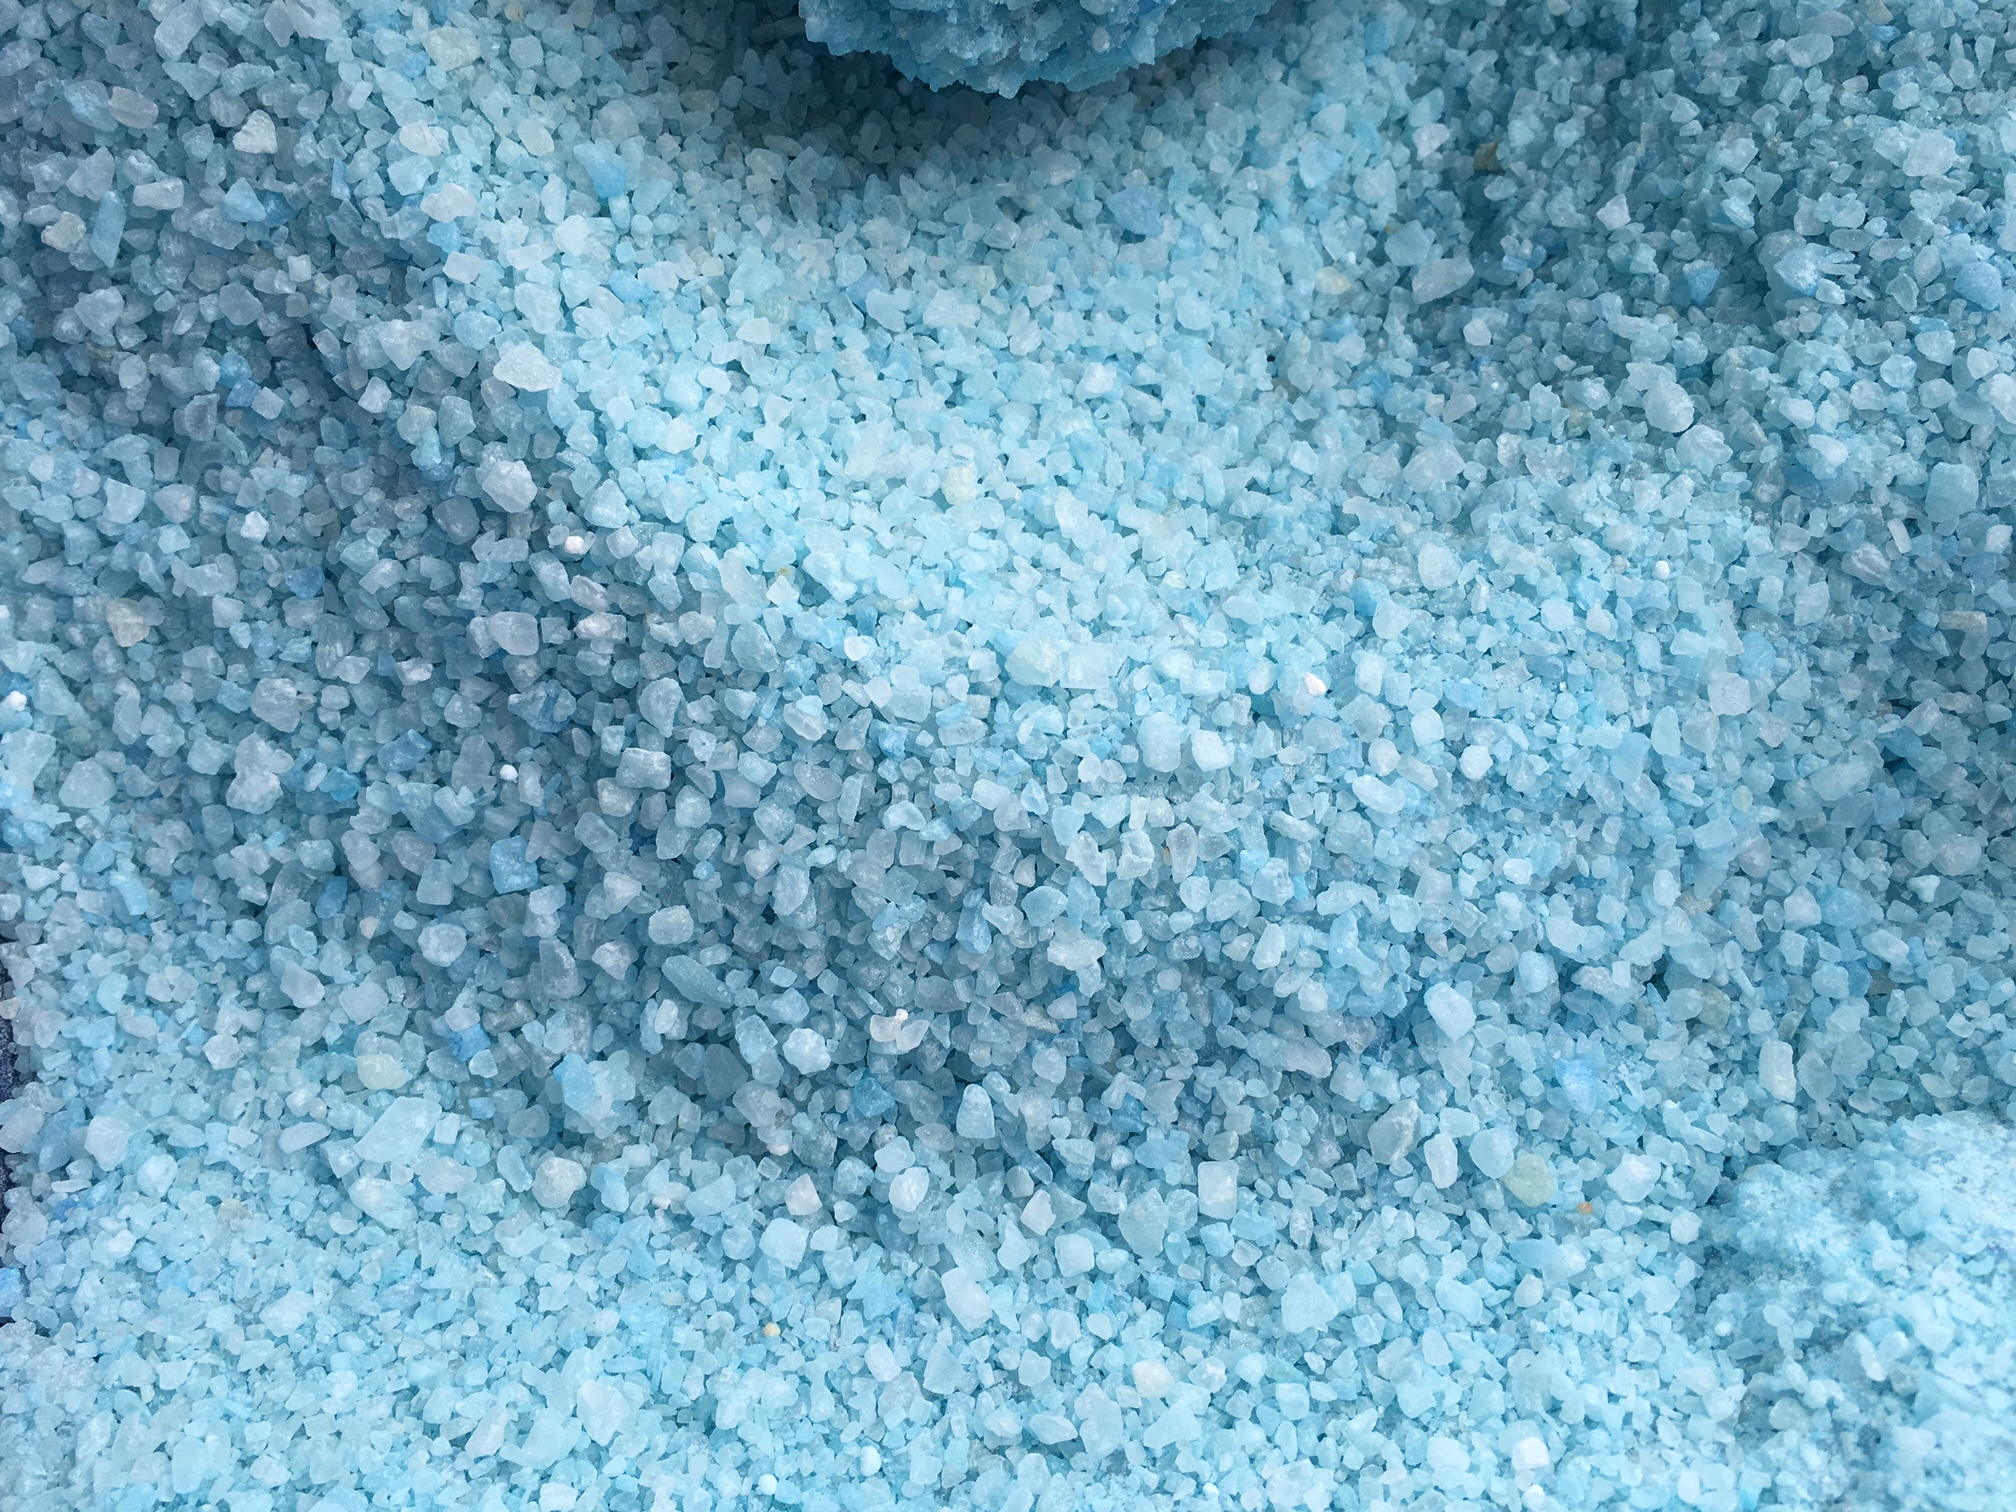 This deicing pellet contains calcium magnesium acetate, which can damage concrete but isn't as corrosive as chloride products.